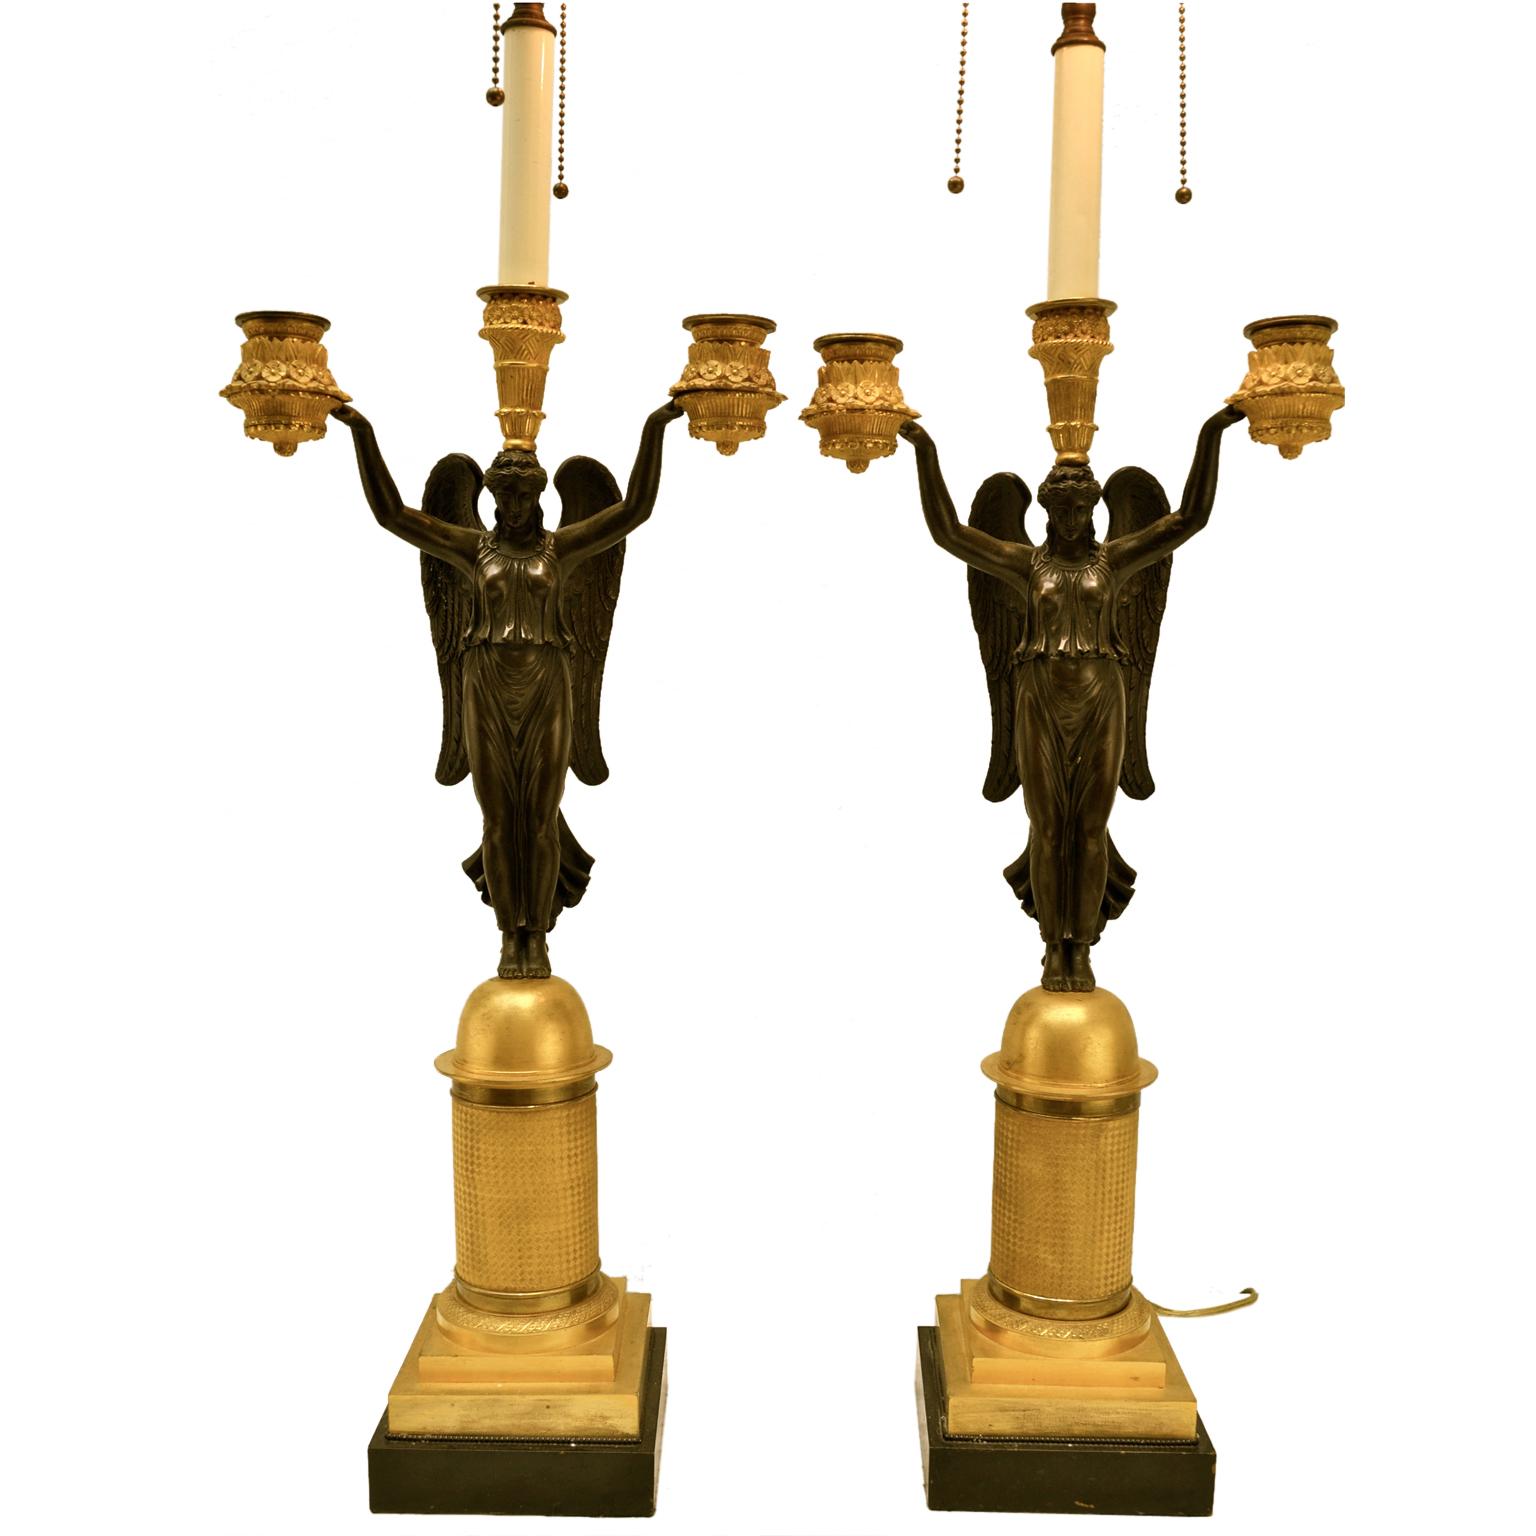 A period pair of French Empire candlestick or lamps, showing a patinated bronze winged Victory her arms aloft holding two decorative gilded candle nozzles resembling cornucopia, her head supports a third candle nozzle. She stands on a gilded half